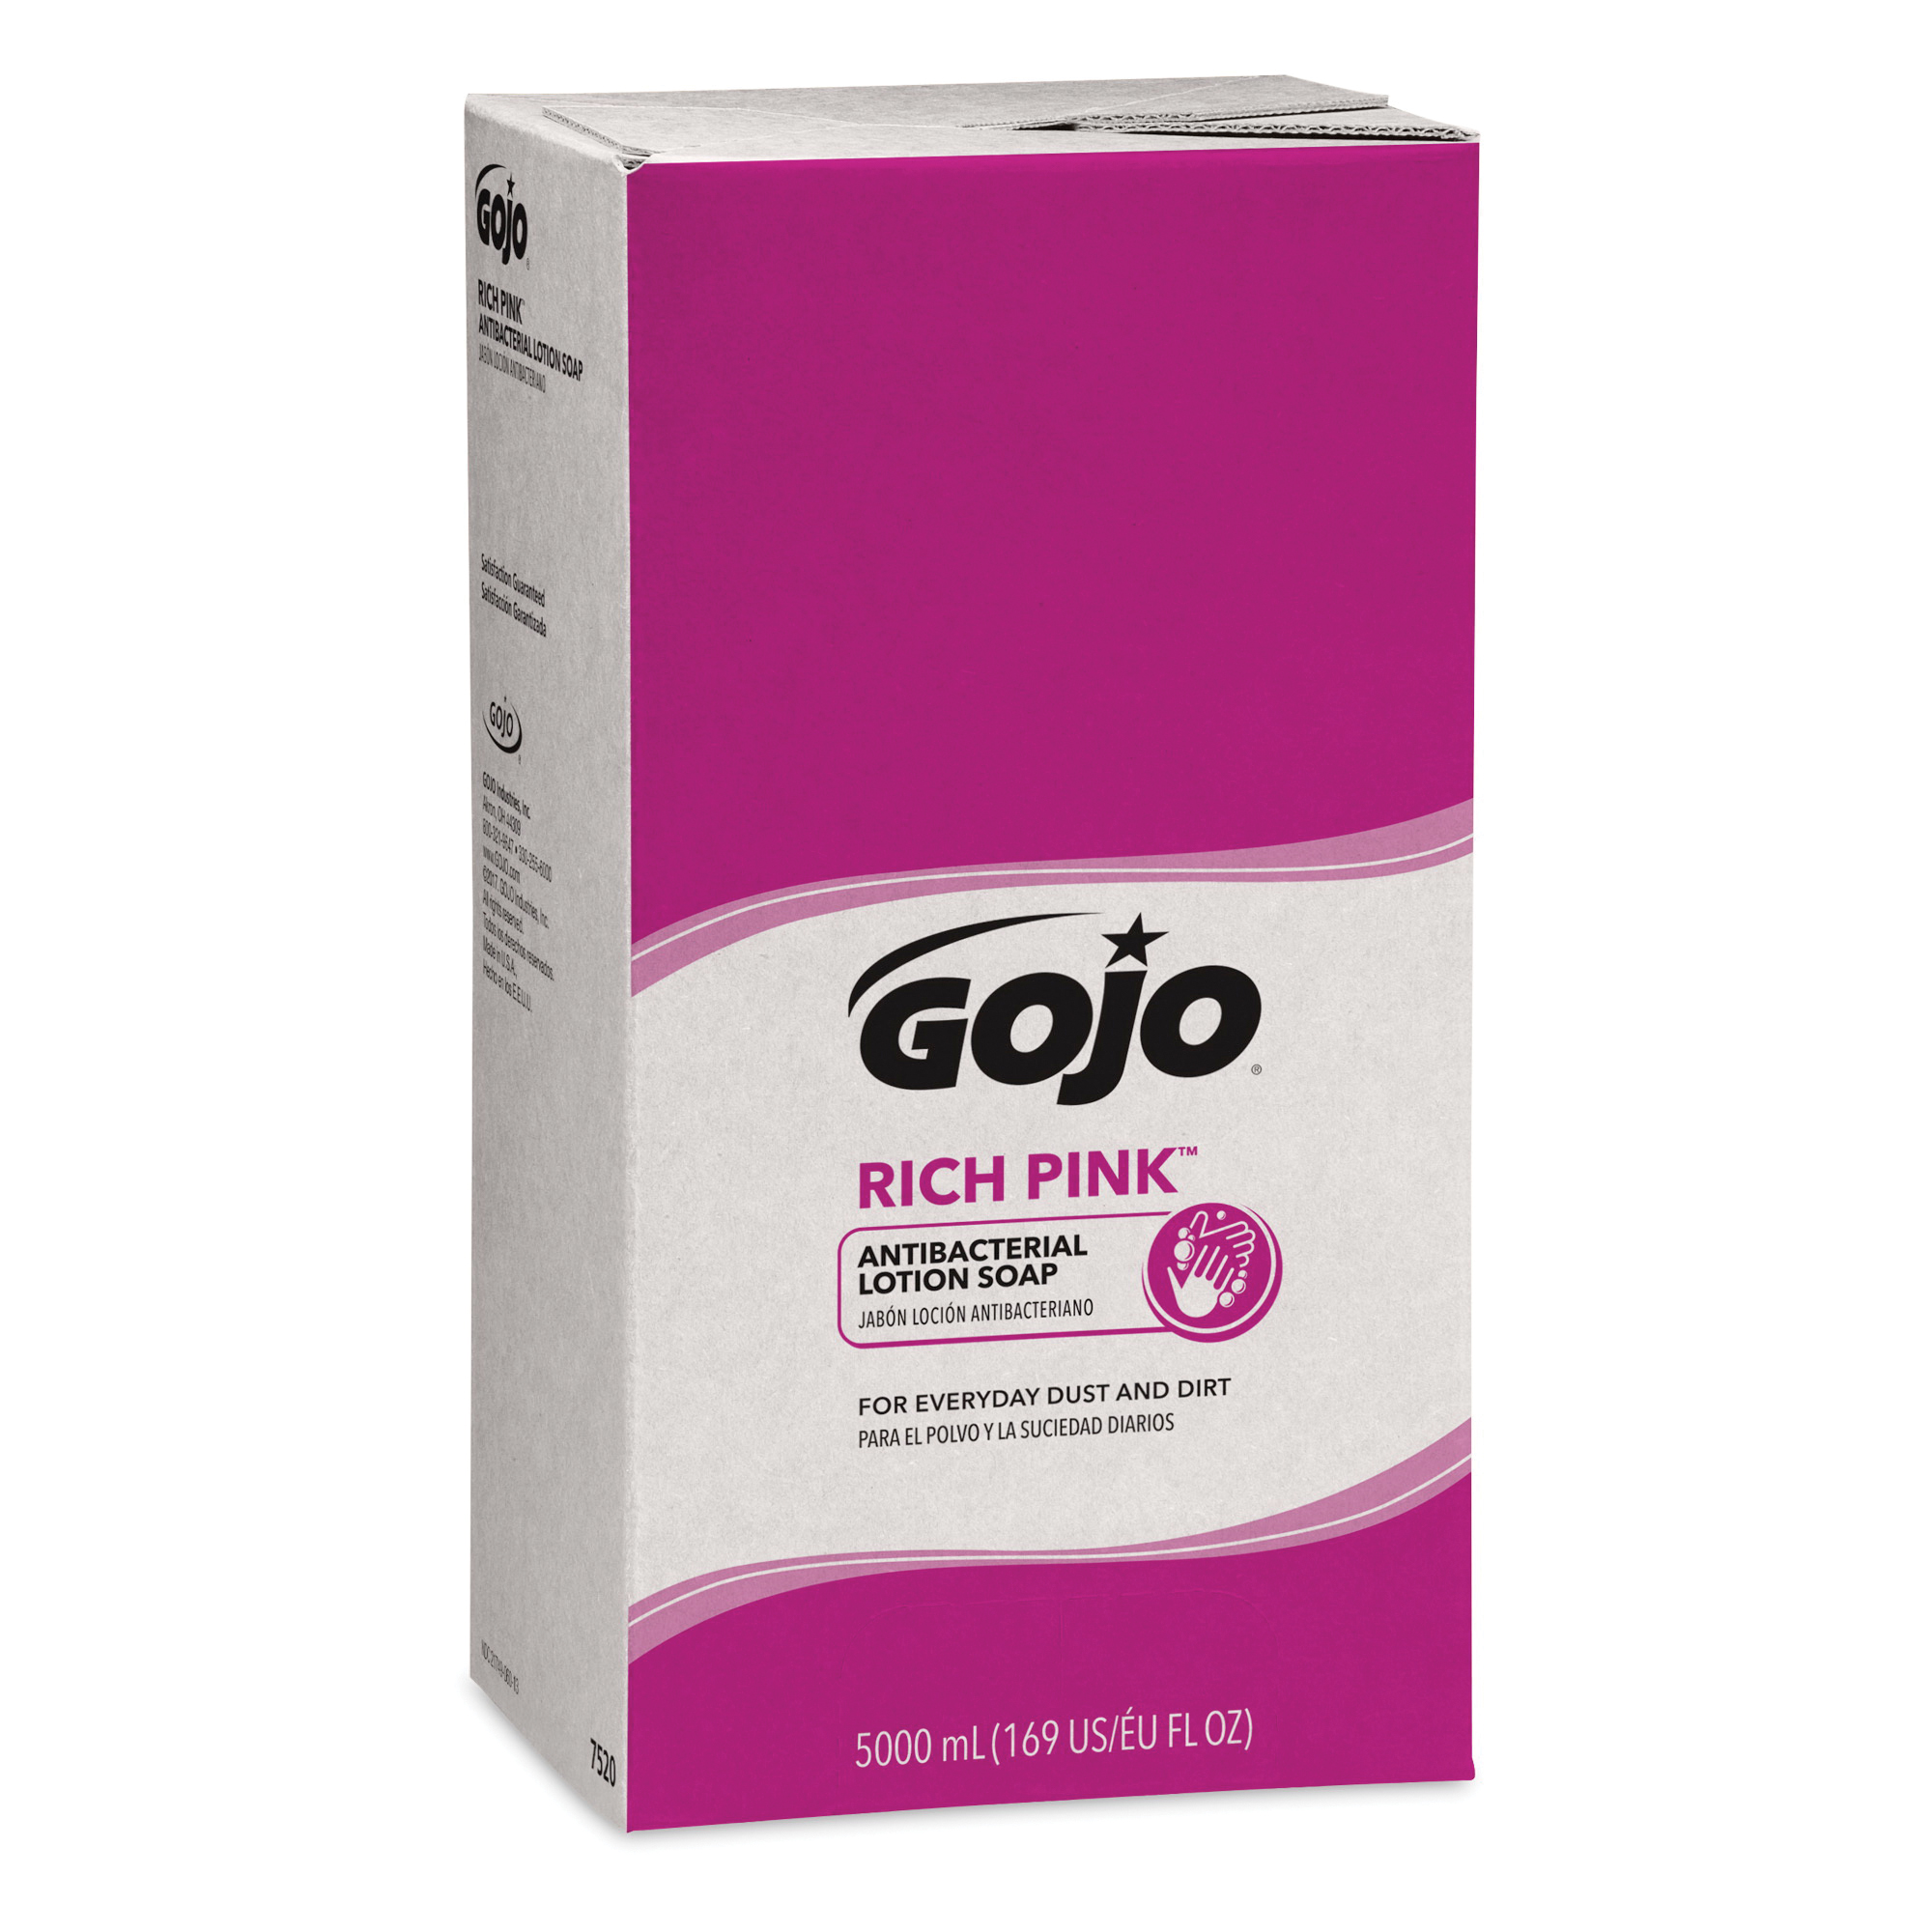 GOJO® 7520-02 RICH PINK™ PRO™ TDX™ Antibacterial Lotion Soap, 5000 mL Nominal, Cartridge Package, Liquid Form, Floral Odor/Scent, Pink